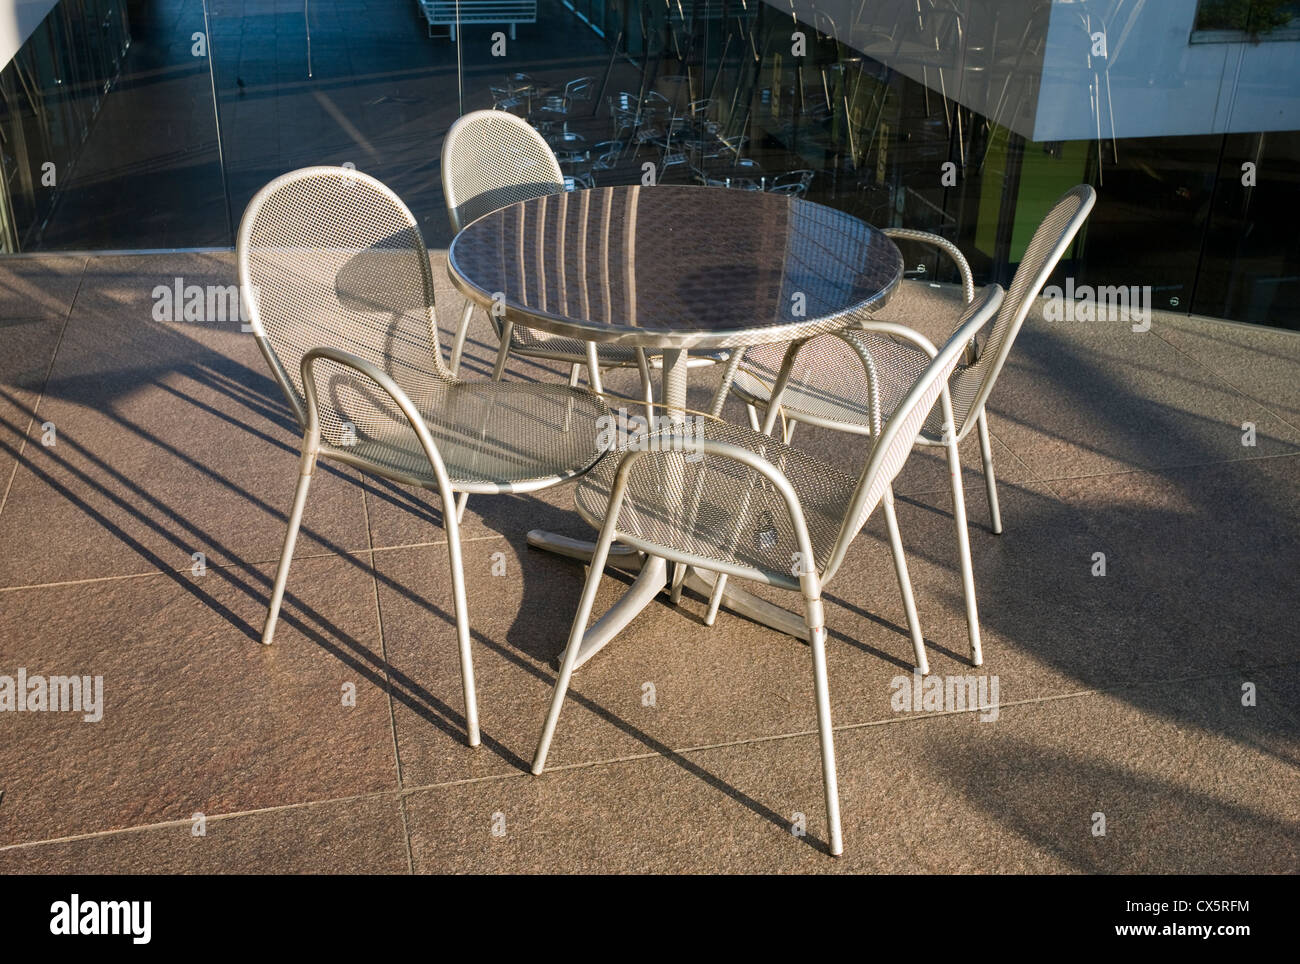 Stainless metal table and chairs in California Plaza,South Grand Avenue, Bunker Hill District, Los Angeles, California, USA Stock Photo